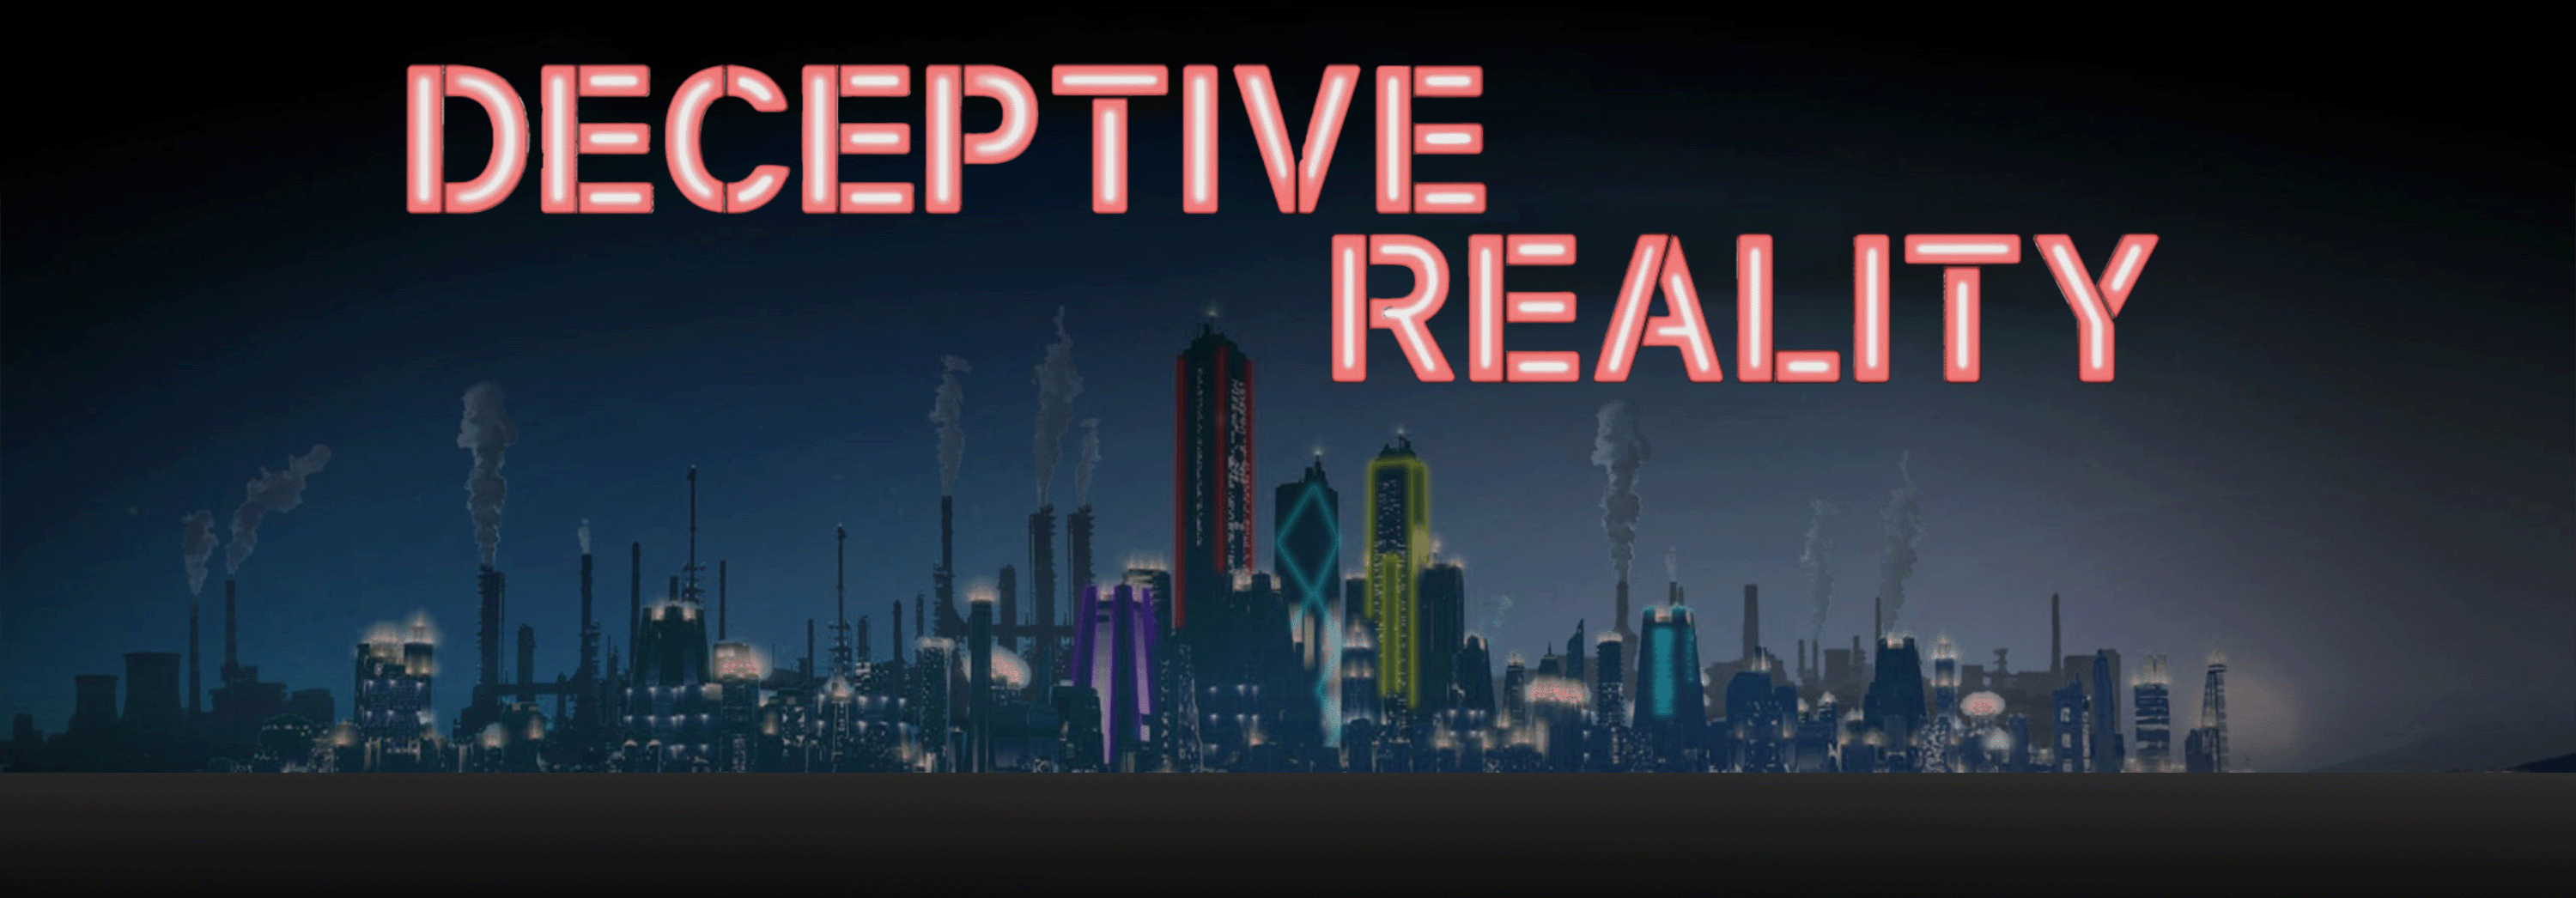 DECEPTIVE REALITY LIMITED EARLY ACCESS 0.5